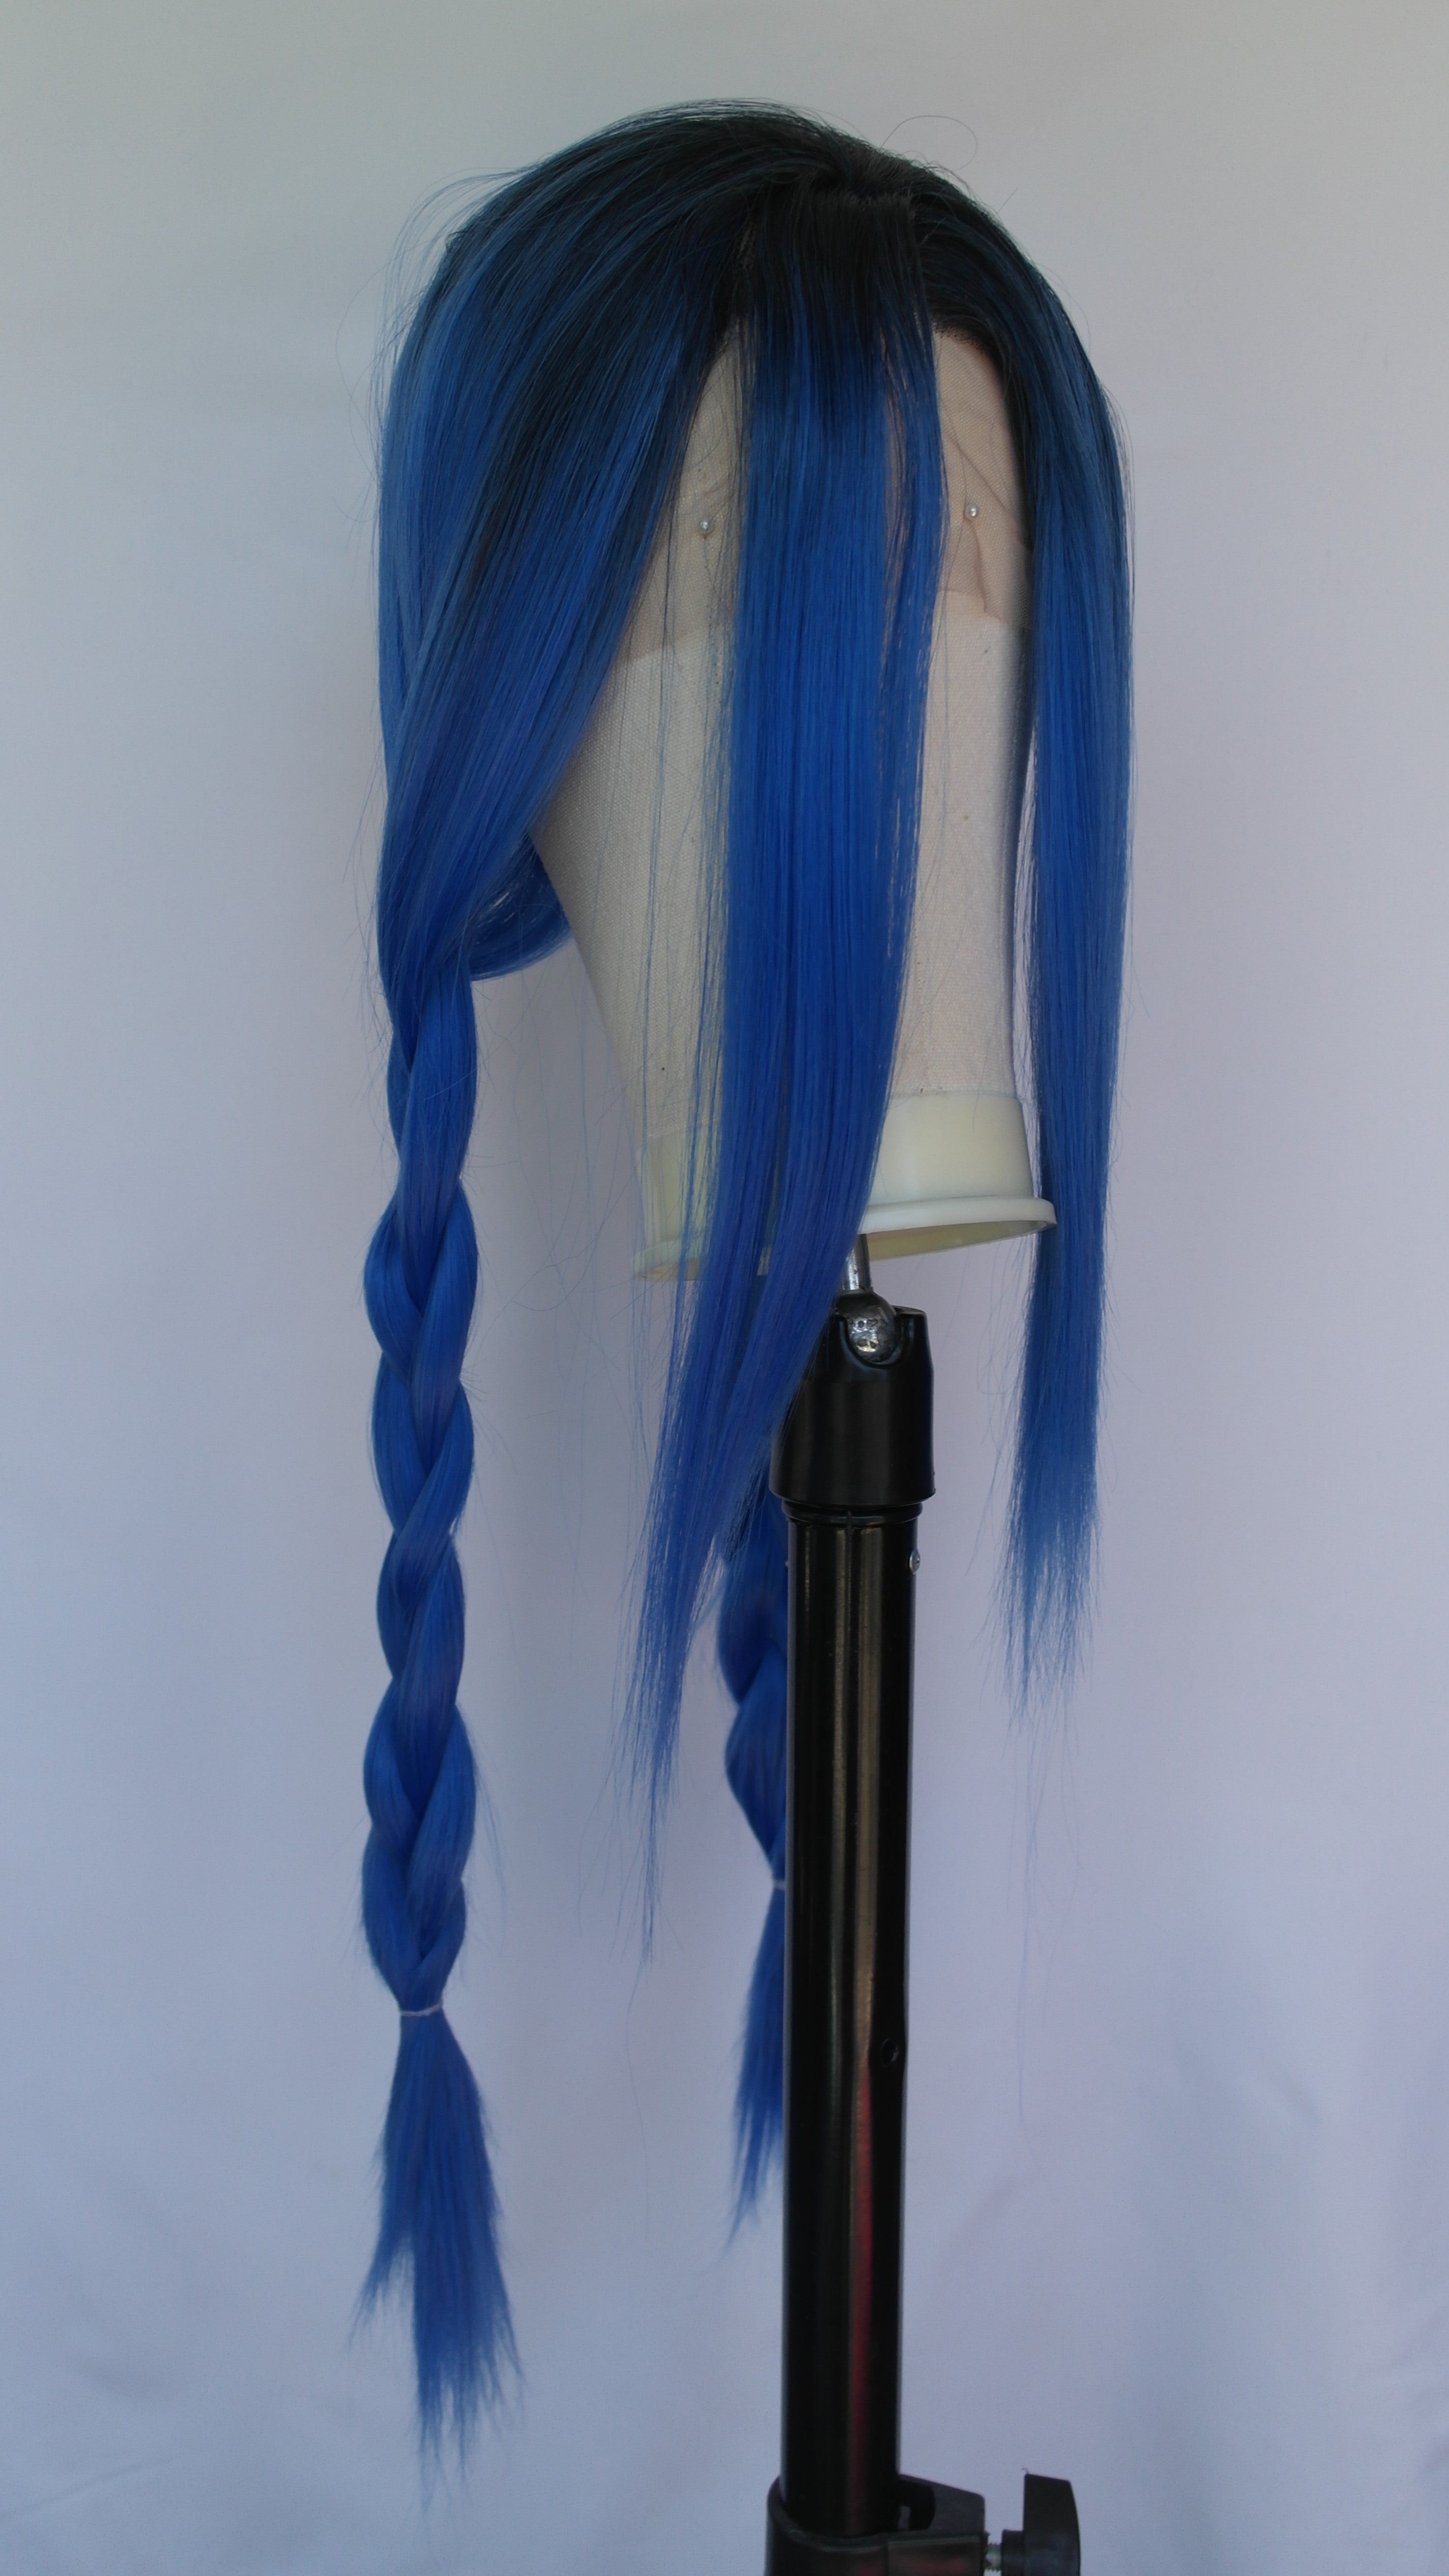 Jinx Blue Dark Ombre Root Lace Front Wig